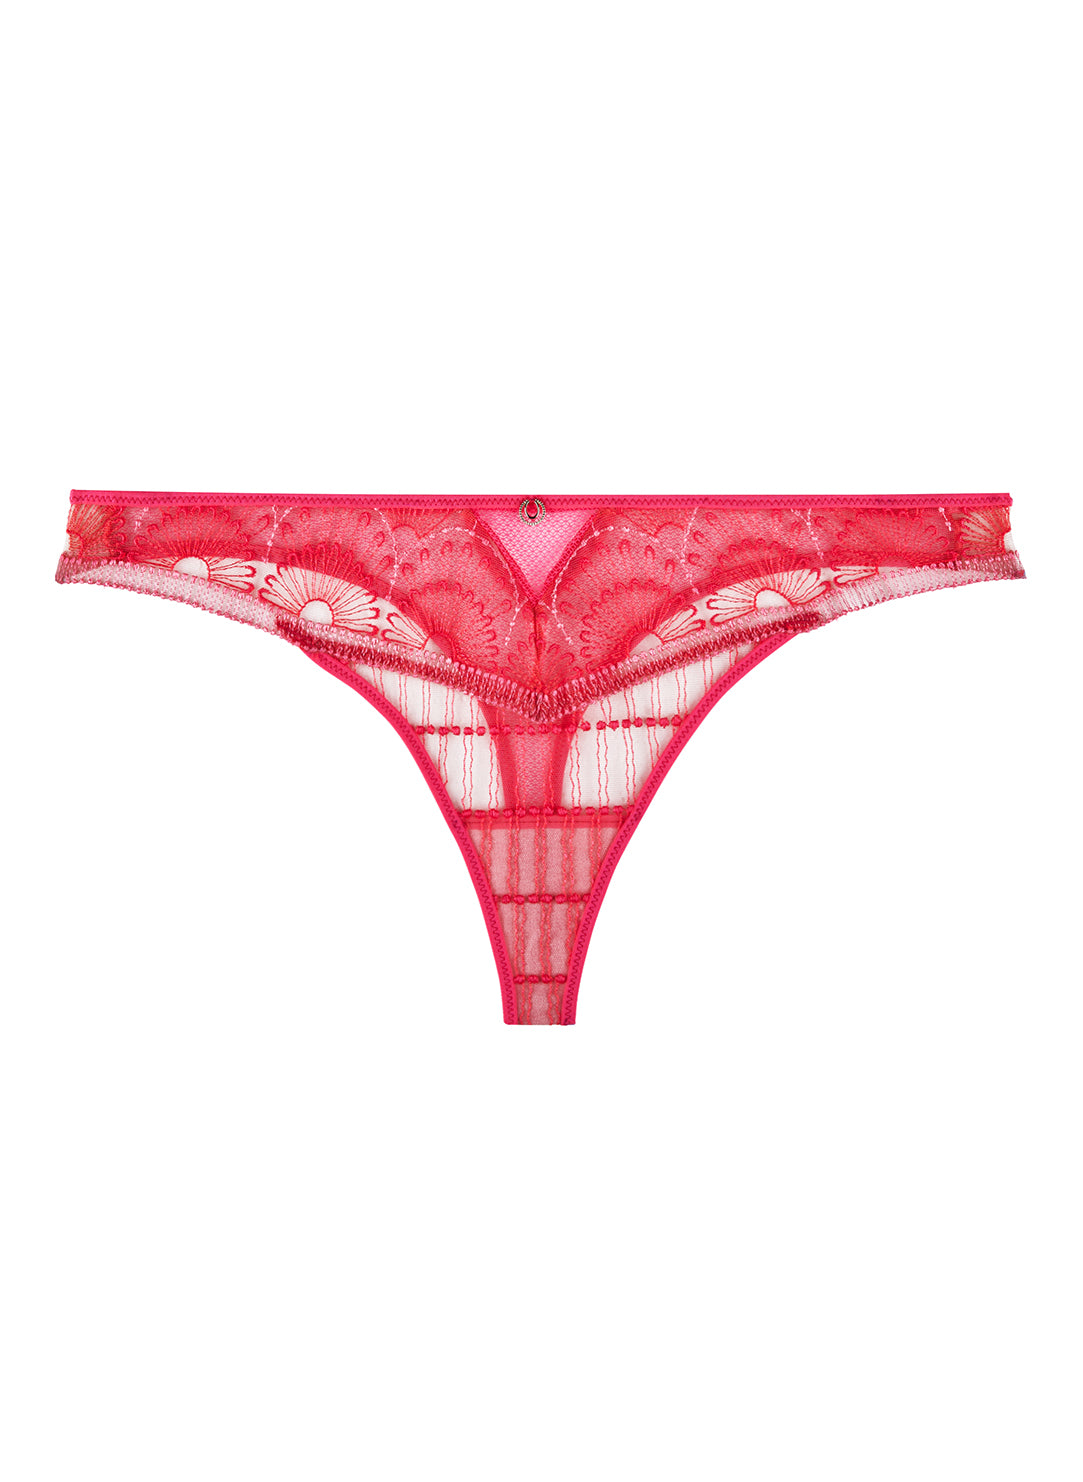 Shyle Fluorescent Pink Picot Lace Edged Thong Panty